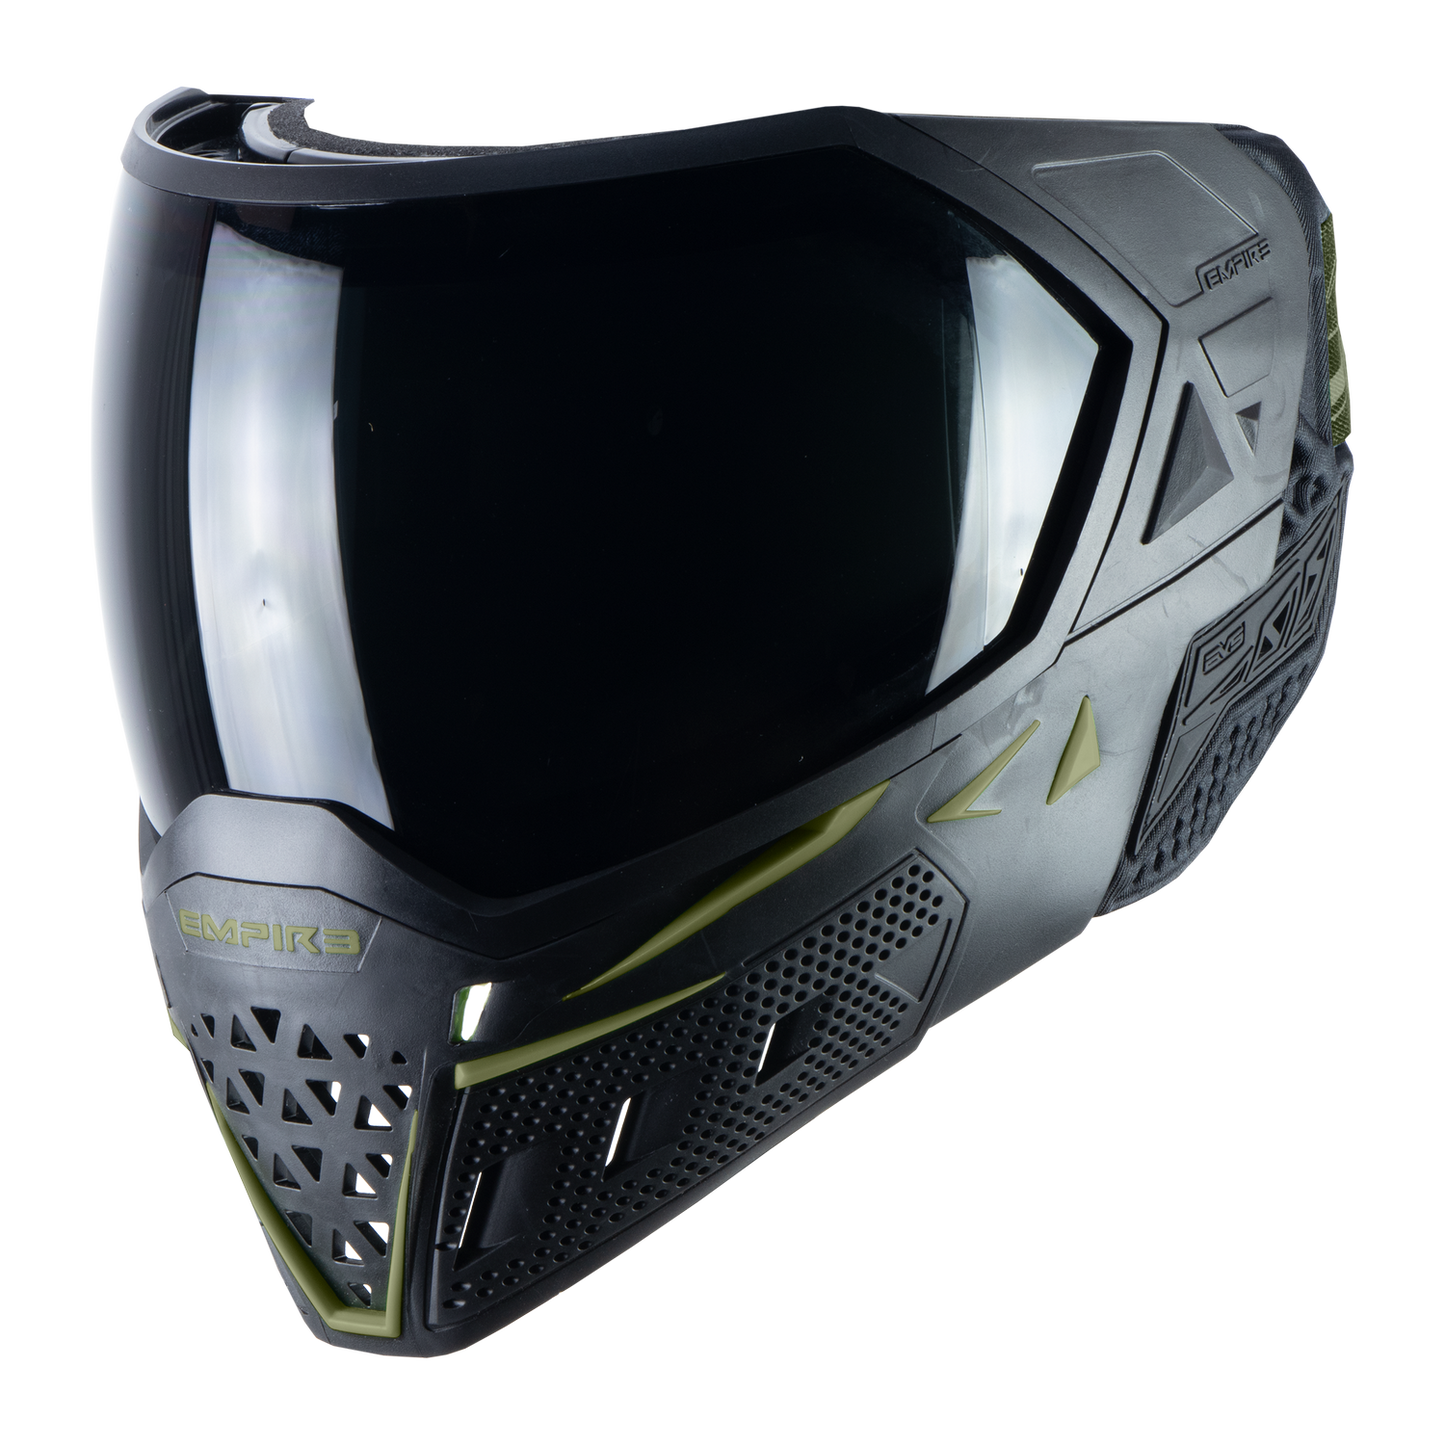 Empire EVS Goggle - Black/Olive - with 2 lenses [Thermal Ninja & Thermal Clear]